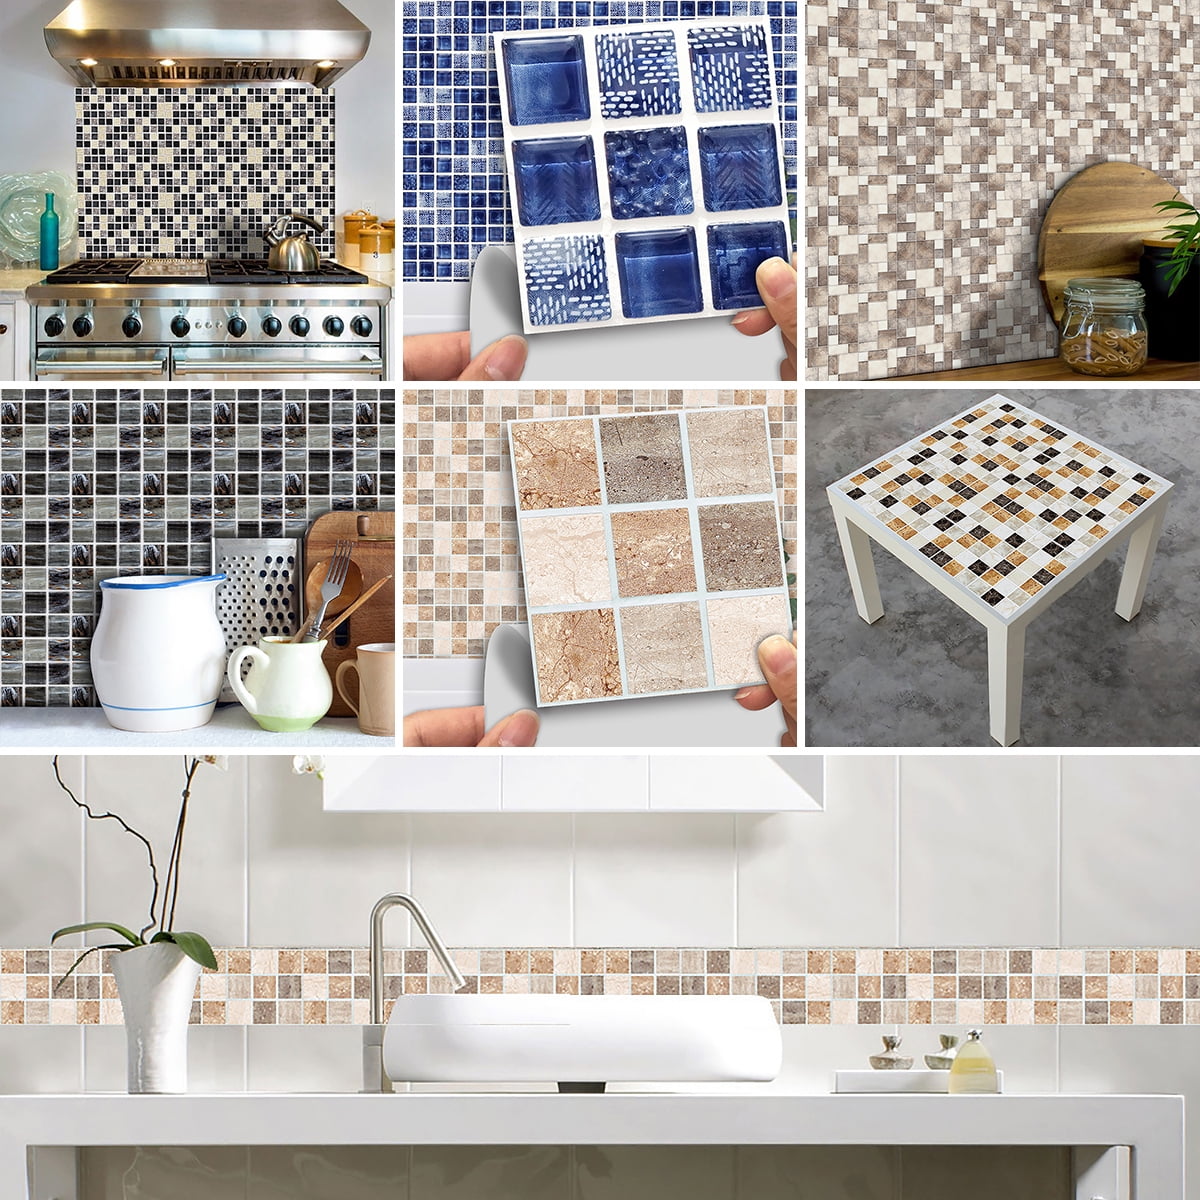 Kitchen Bathroom Tile Wall Art Decals Home Decoration 10 x 10 cm DIY Self Adhesive Waterproof Sticky Wallpaper 008 60 PCS Mosaic Wall Tile Stickers 